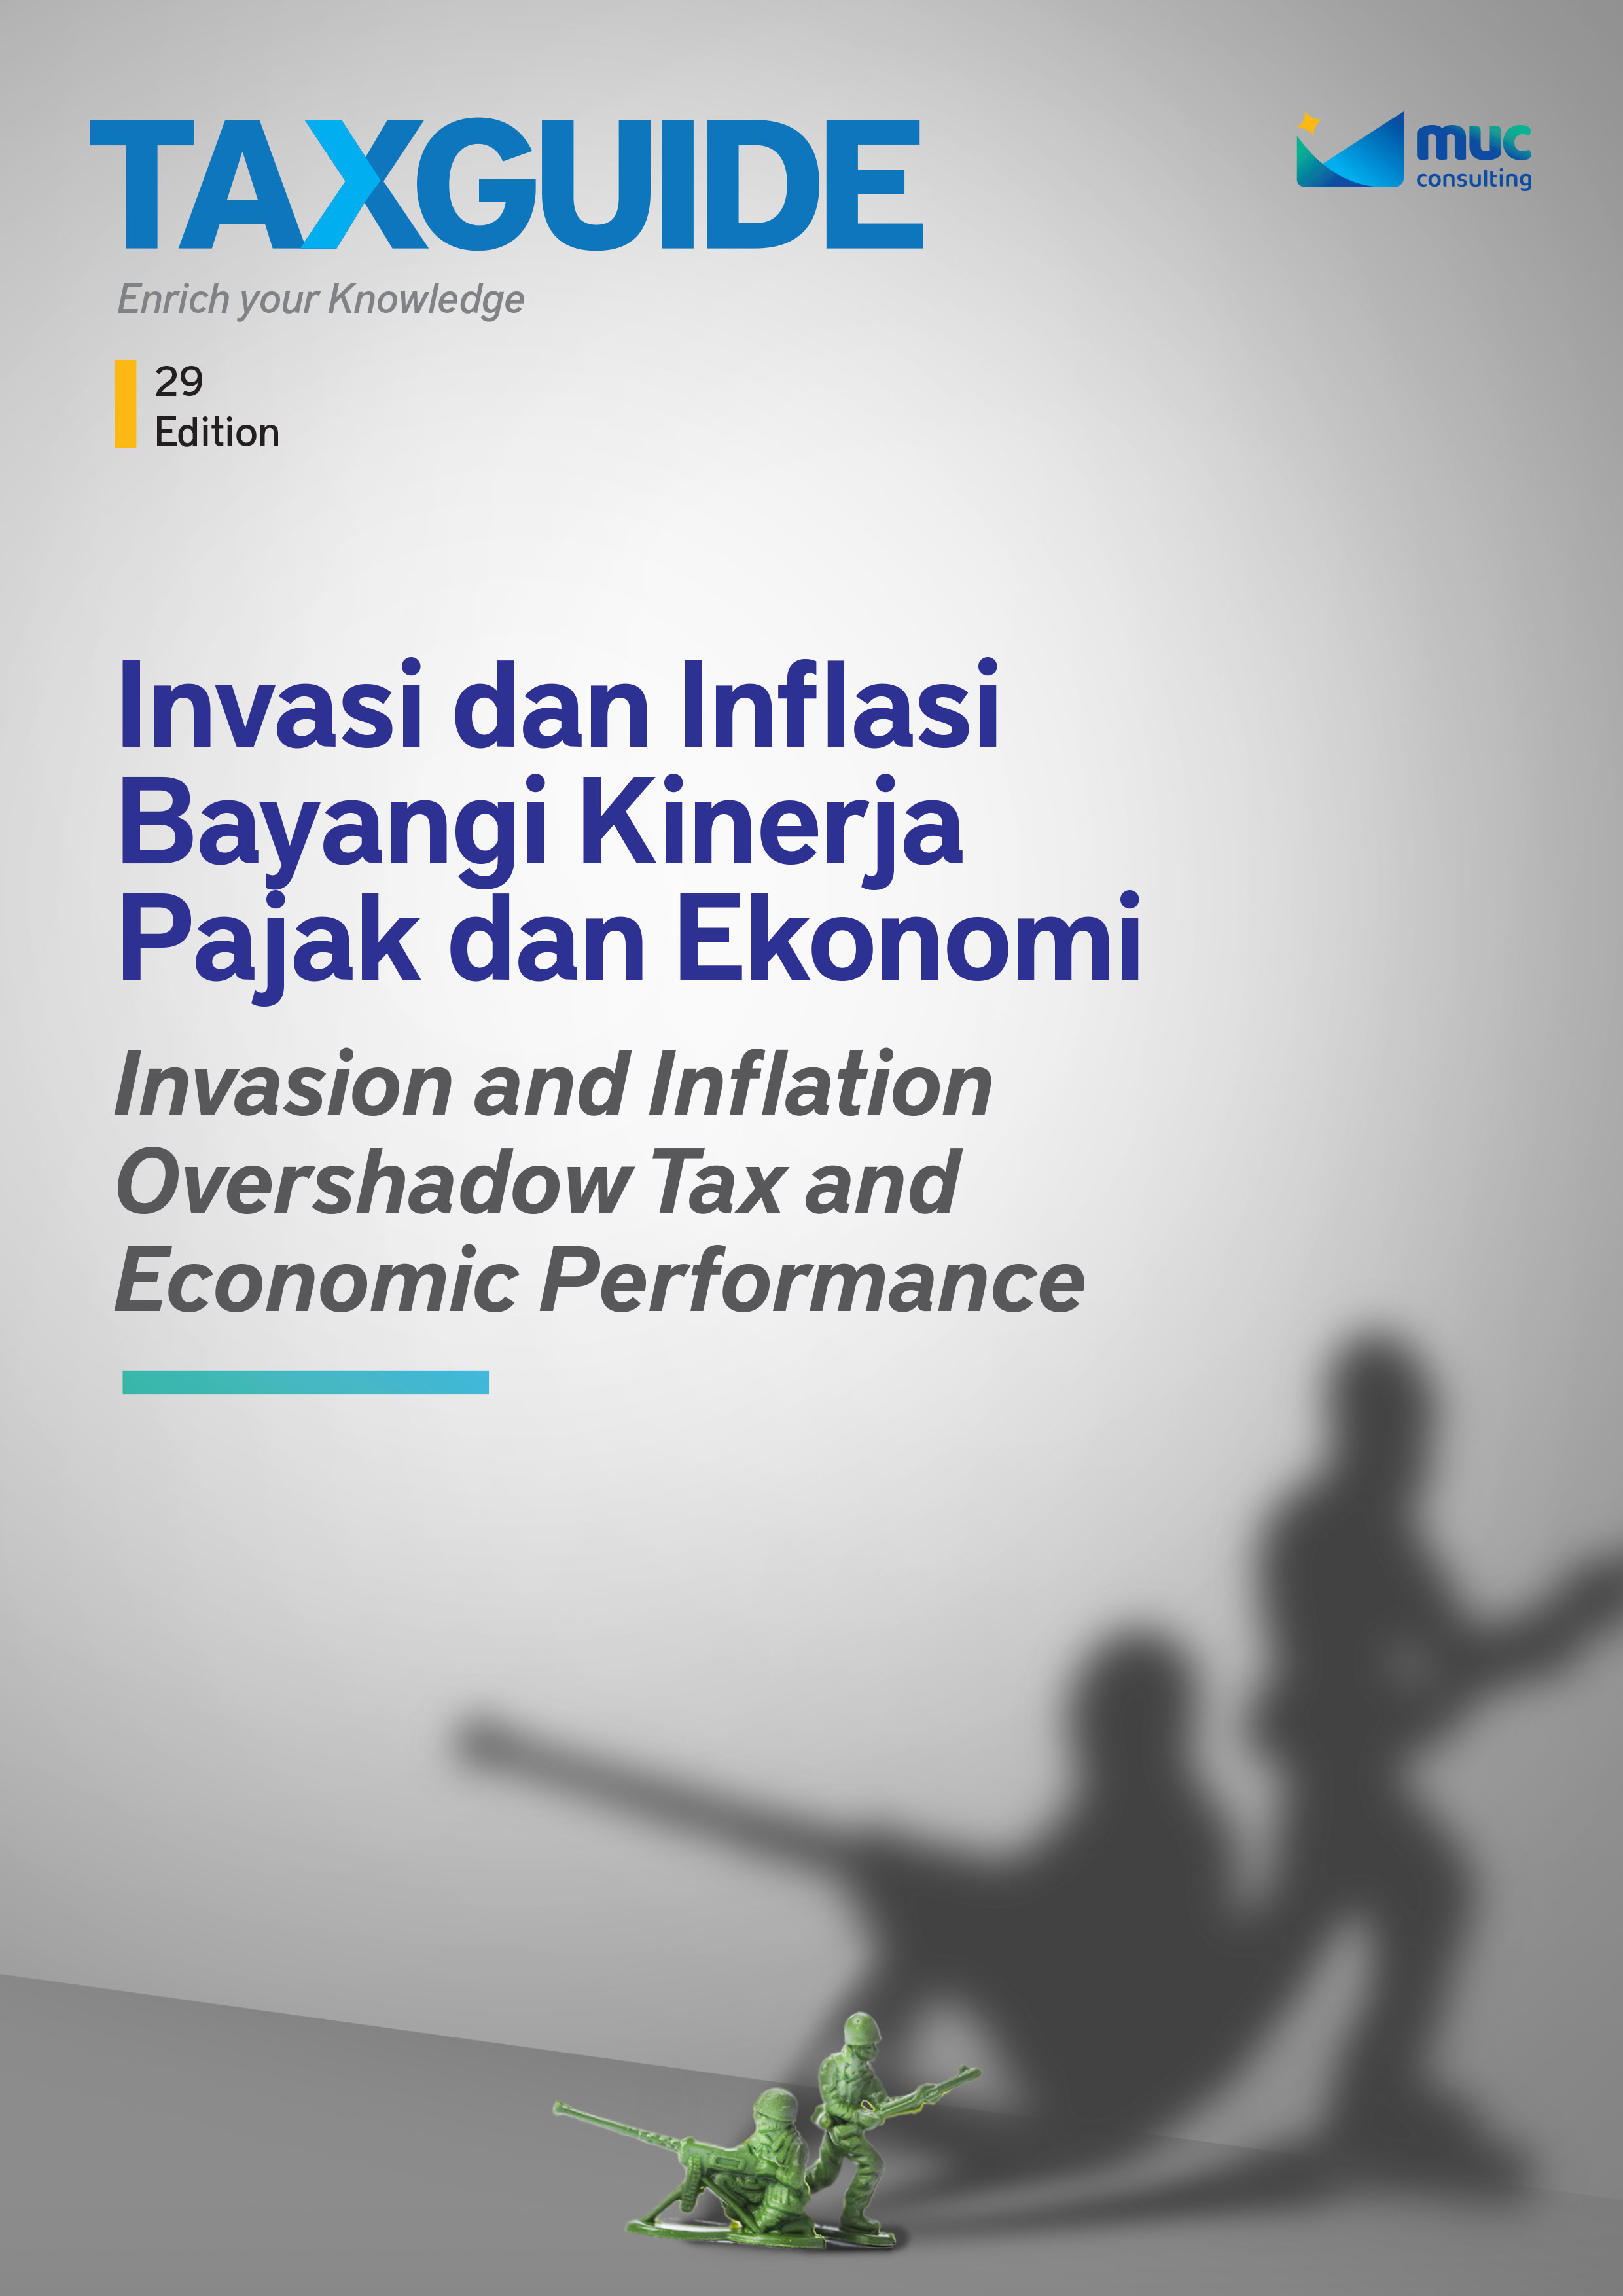 Invasion and Inflation Overshadow Tax and Economic Performance